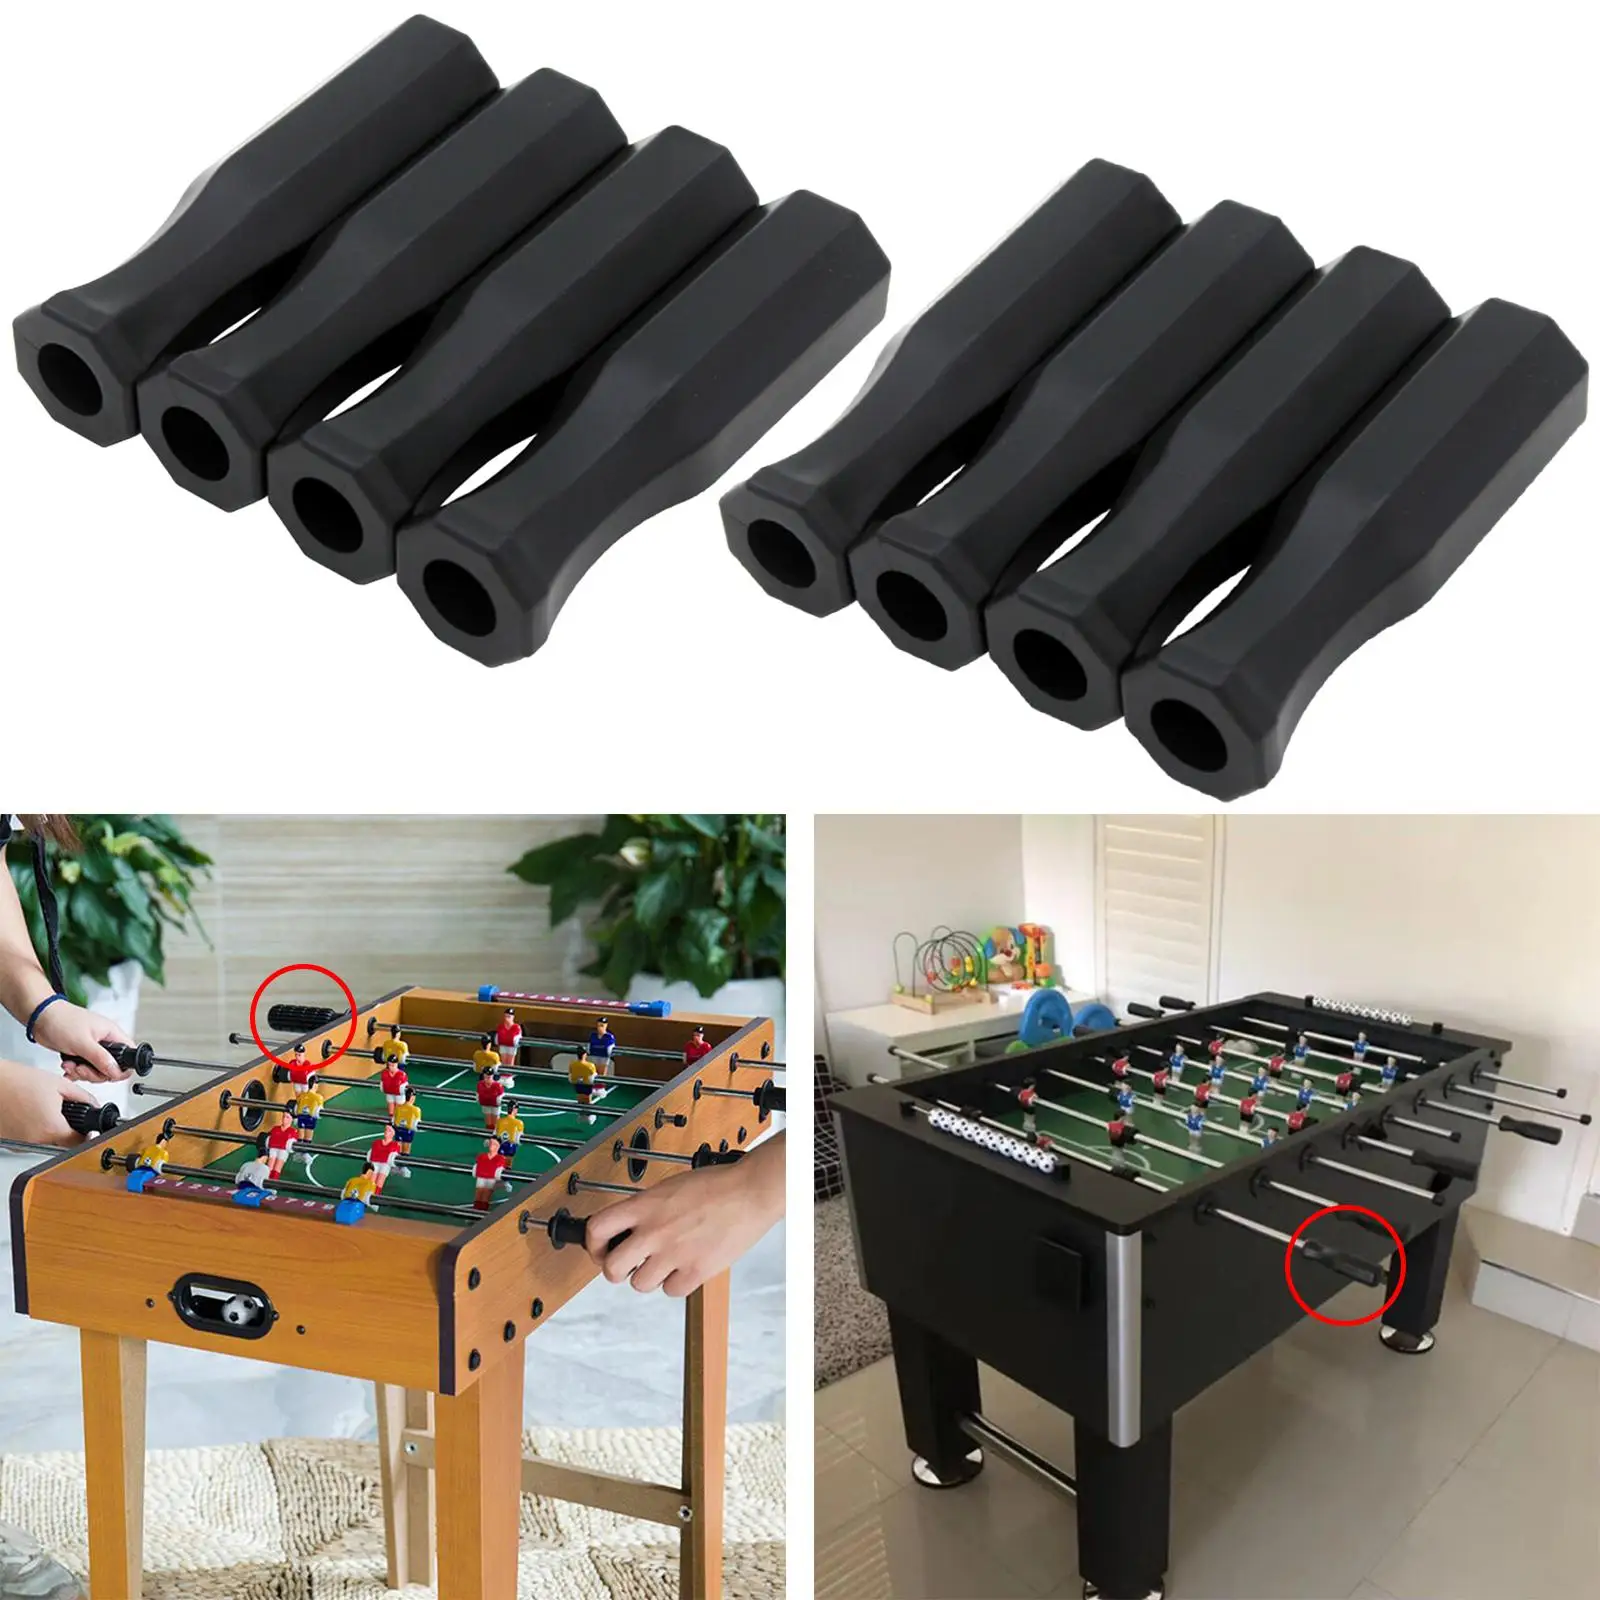 LIOOBO 8 Pcs Table Football Handle Covers Plastic Thicken Universal Foosball Handle Grip Cover Table Football Accessory Foosball Handle Grip Case for Foosball Table 